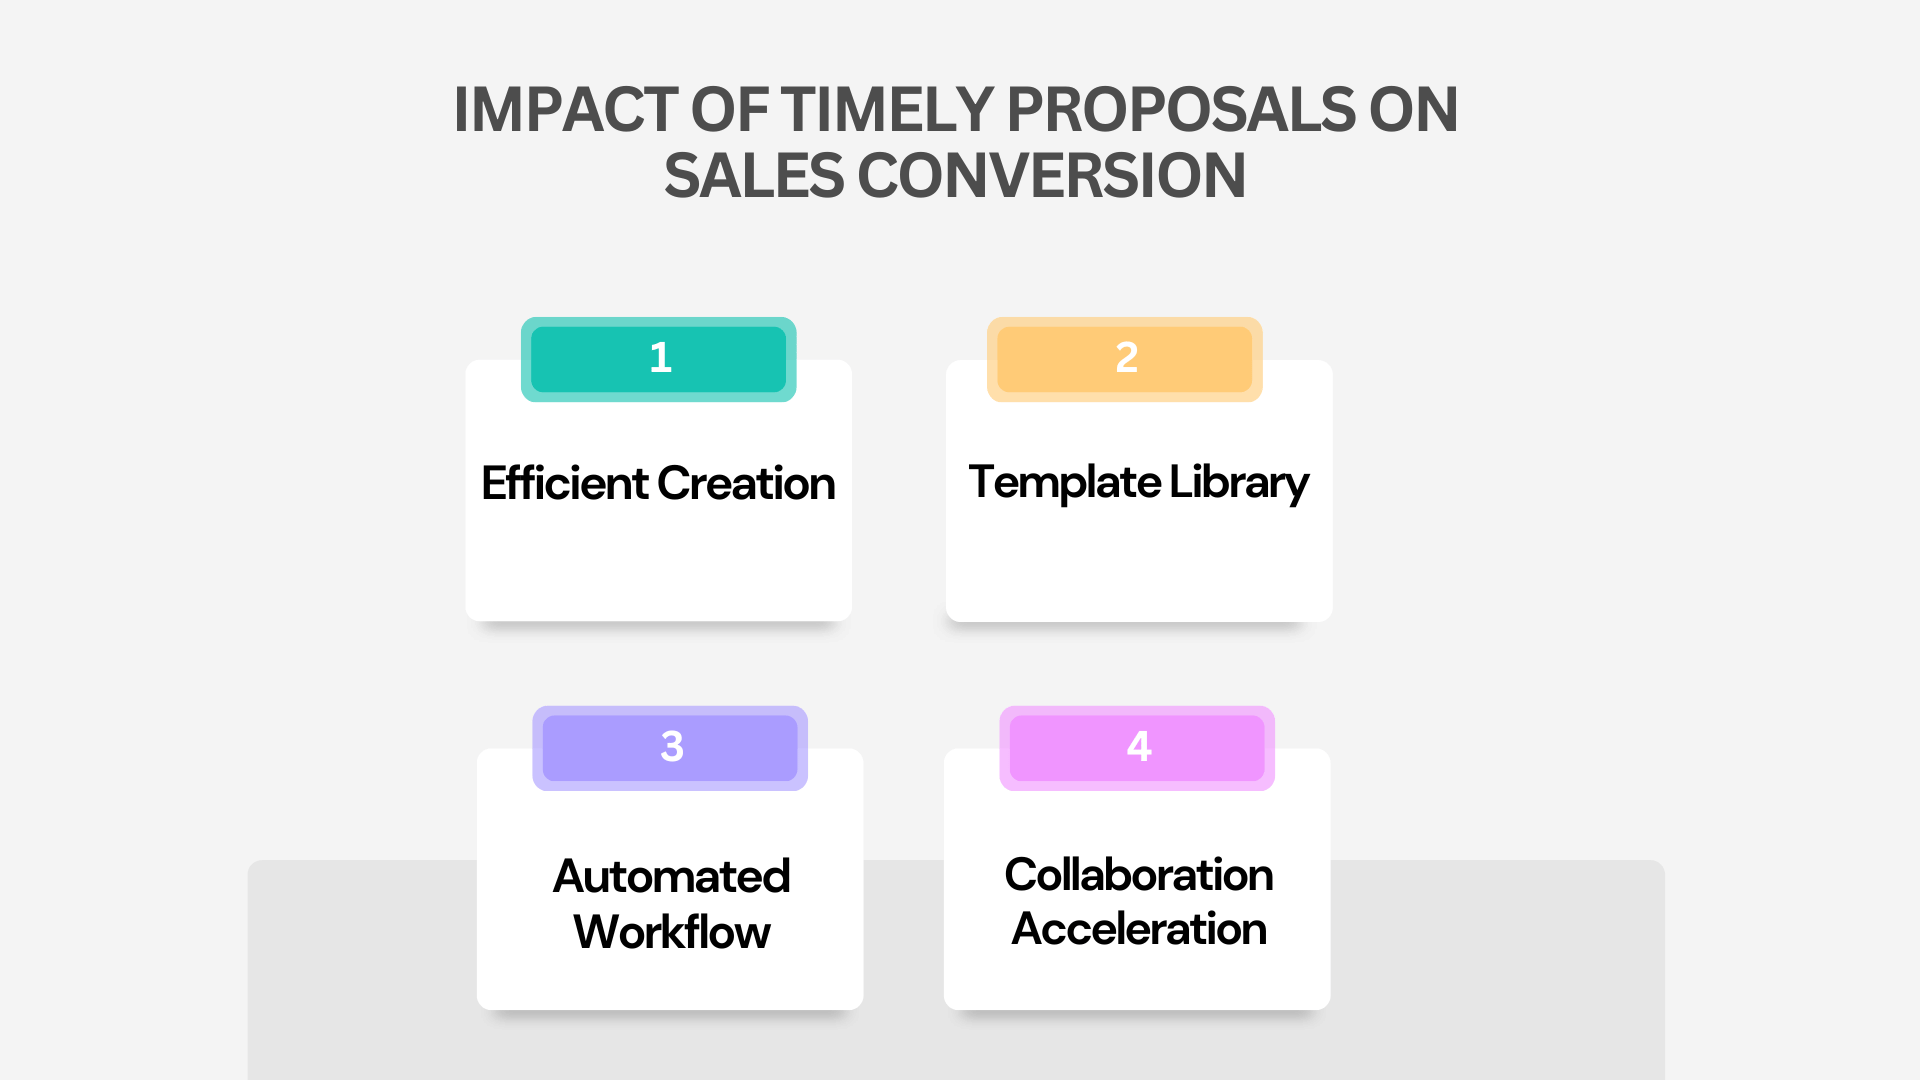 Impact of Timely Proposals on Sales Conversion